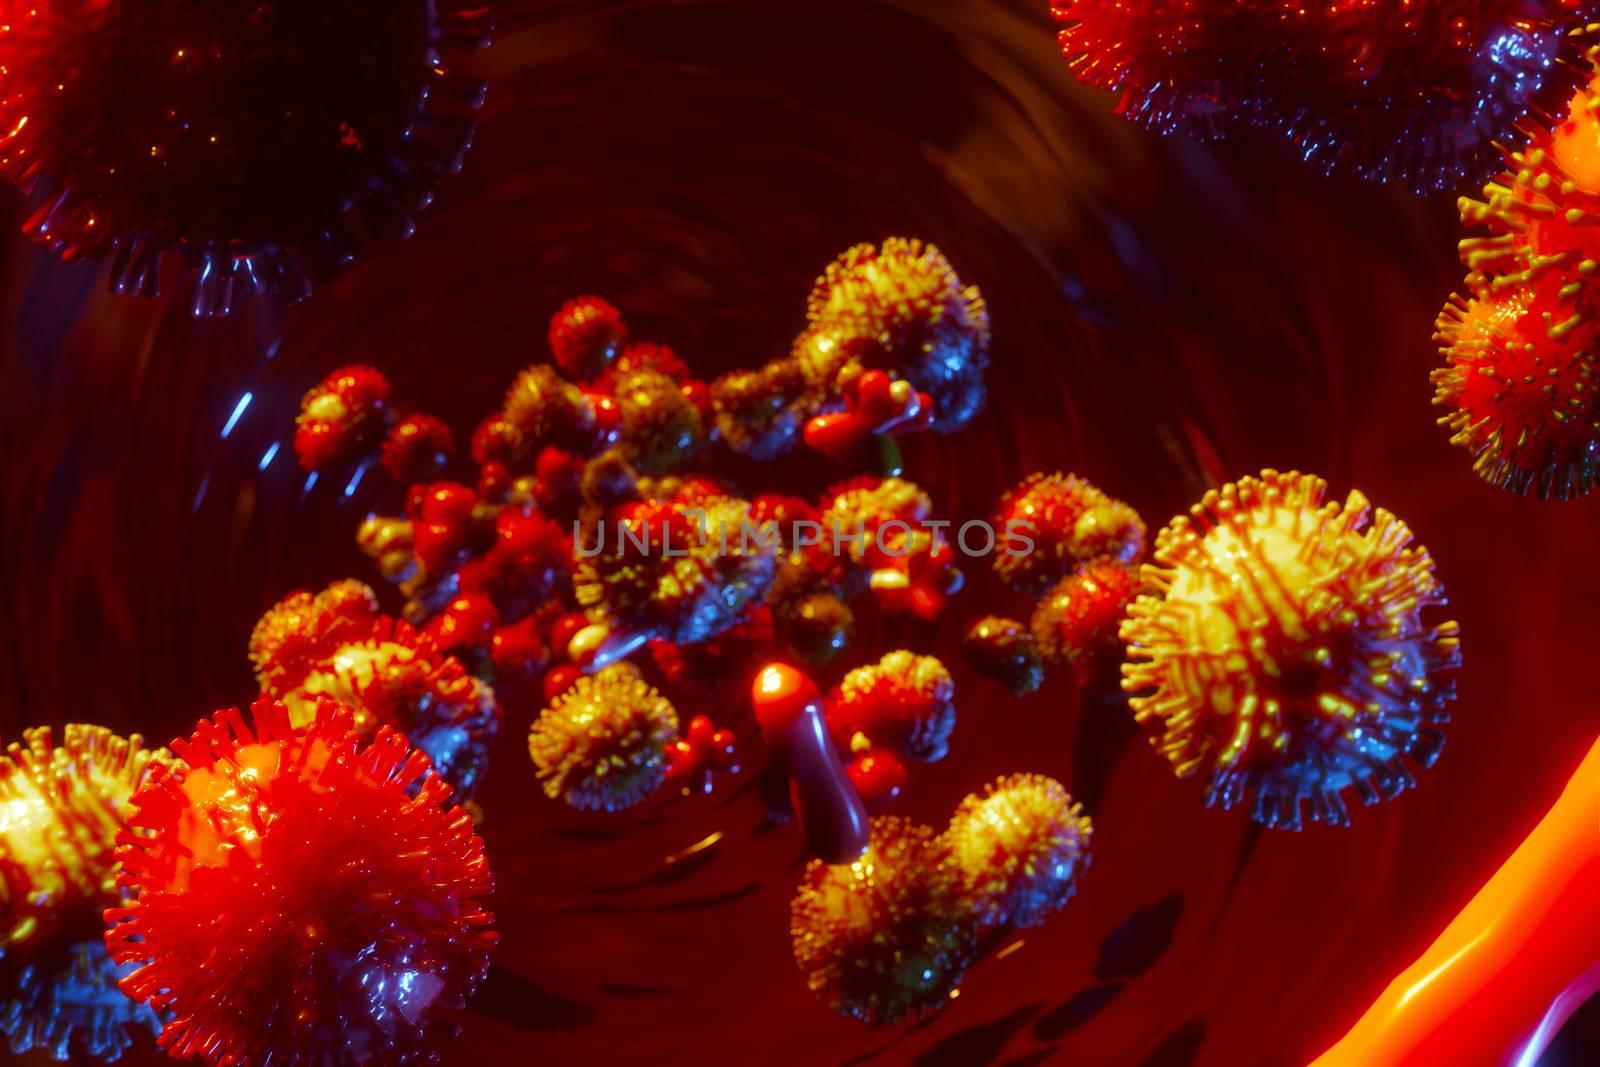 Pathogenic virus or bacteria cell in blood stream by DCStudio